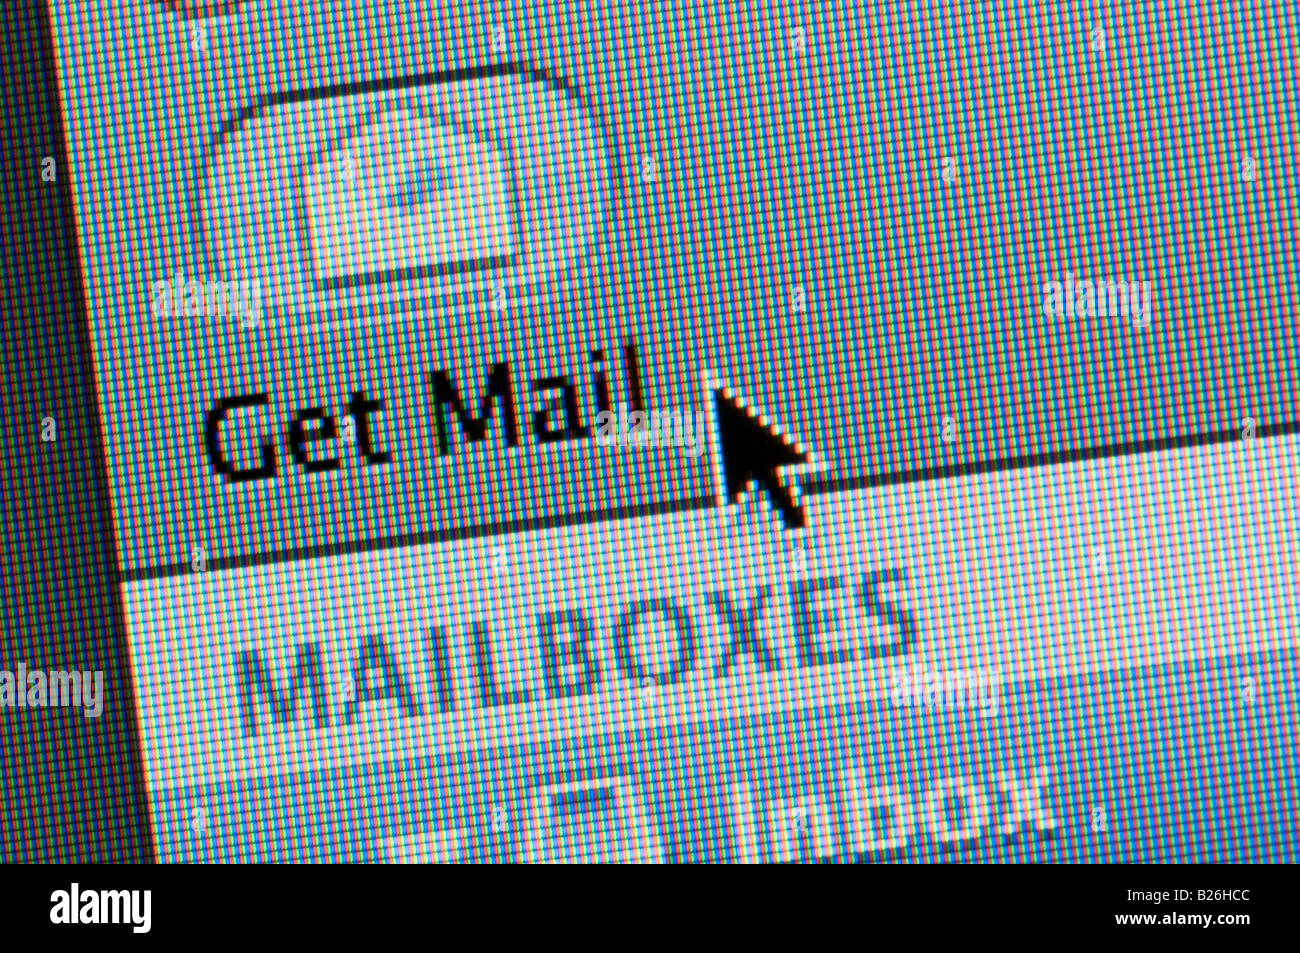 Email application Stock Photo